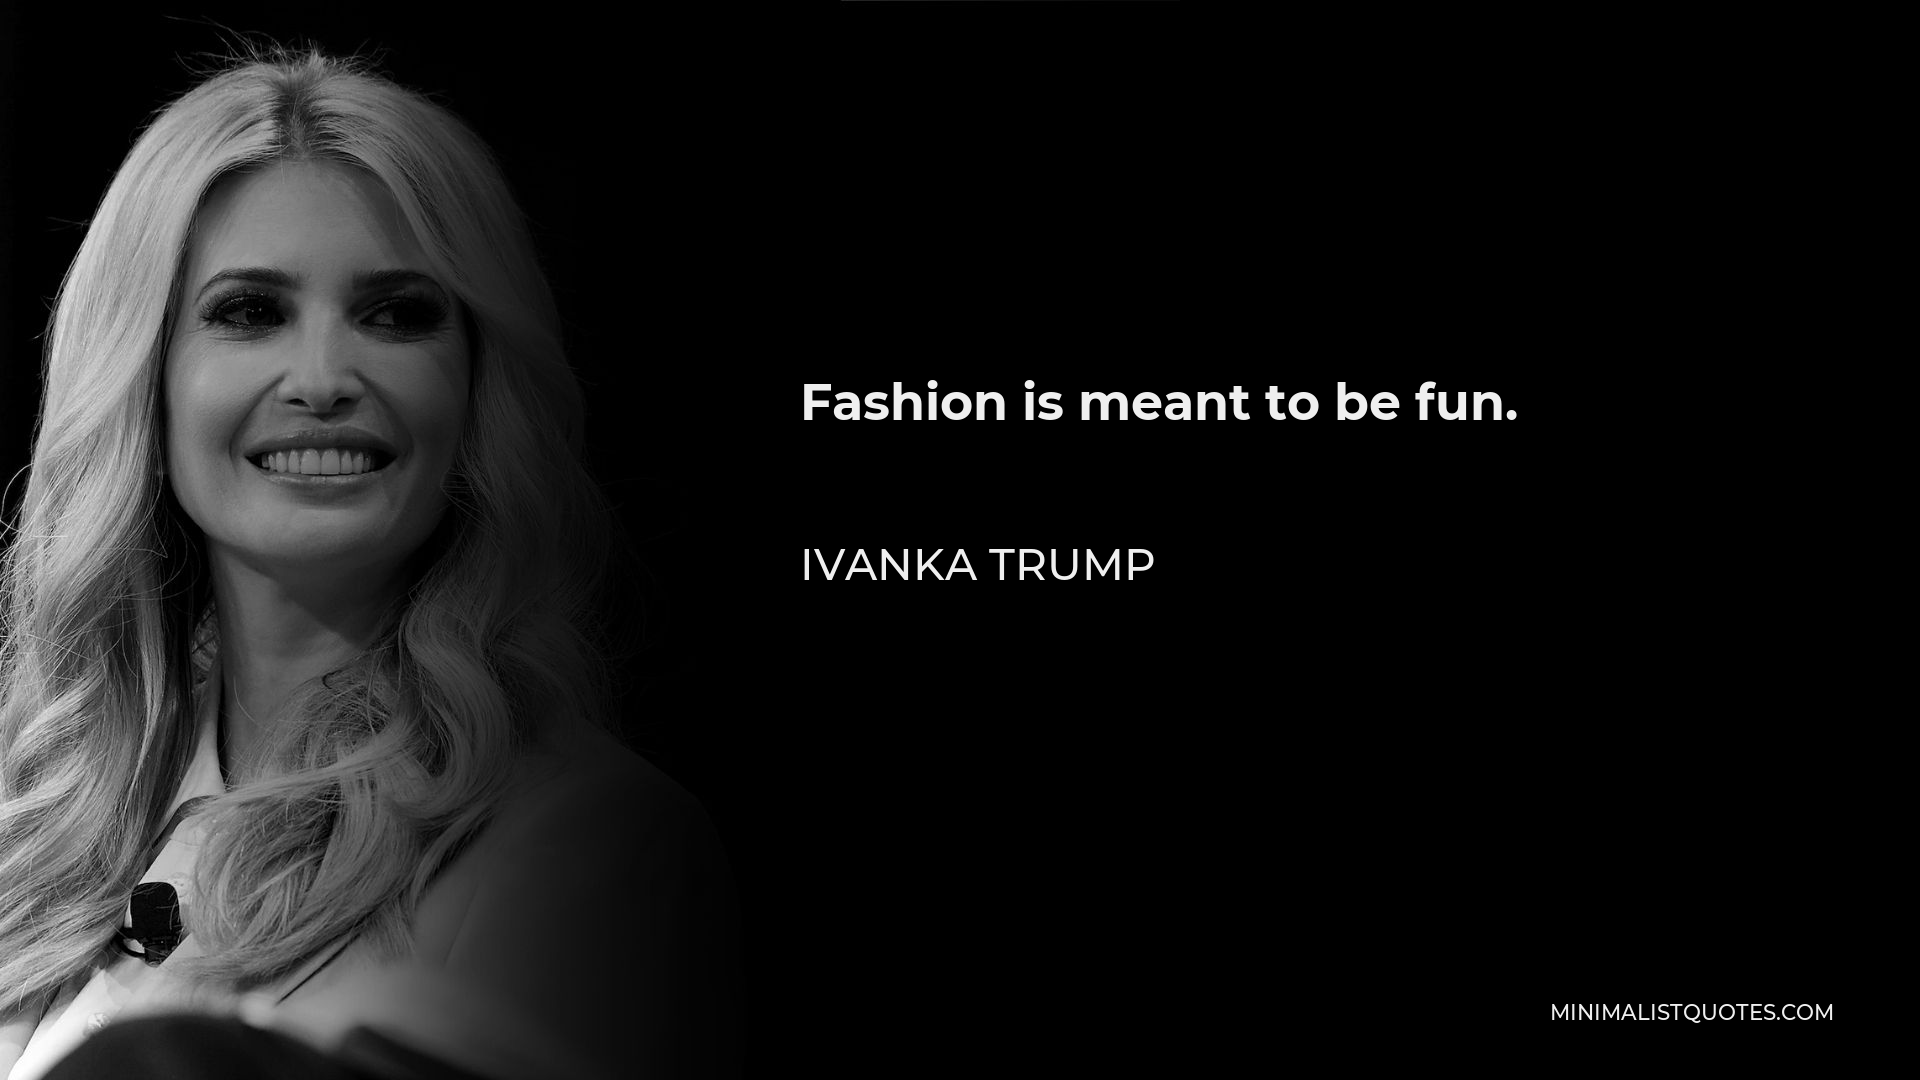 Ivanka Trump Quote - Fashion is meant to be fun.